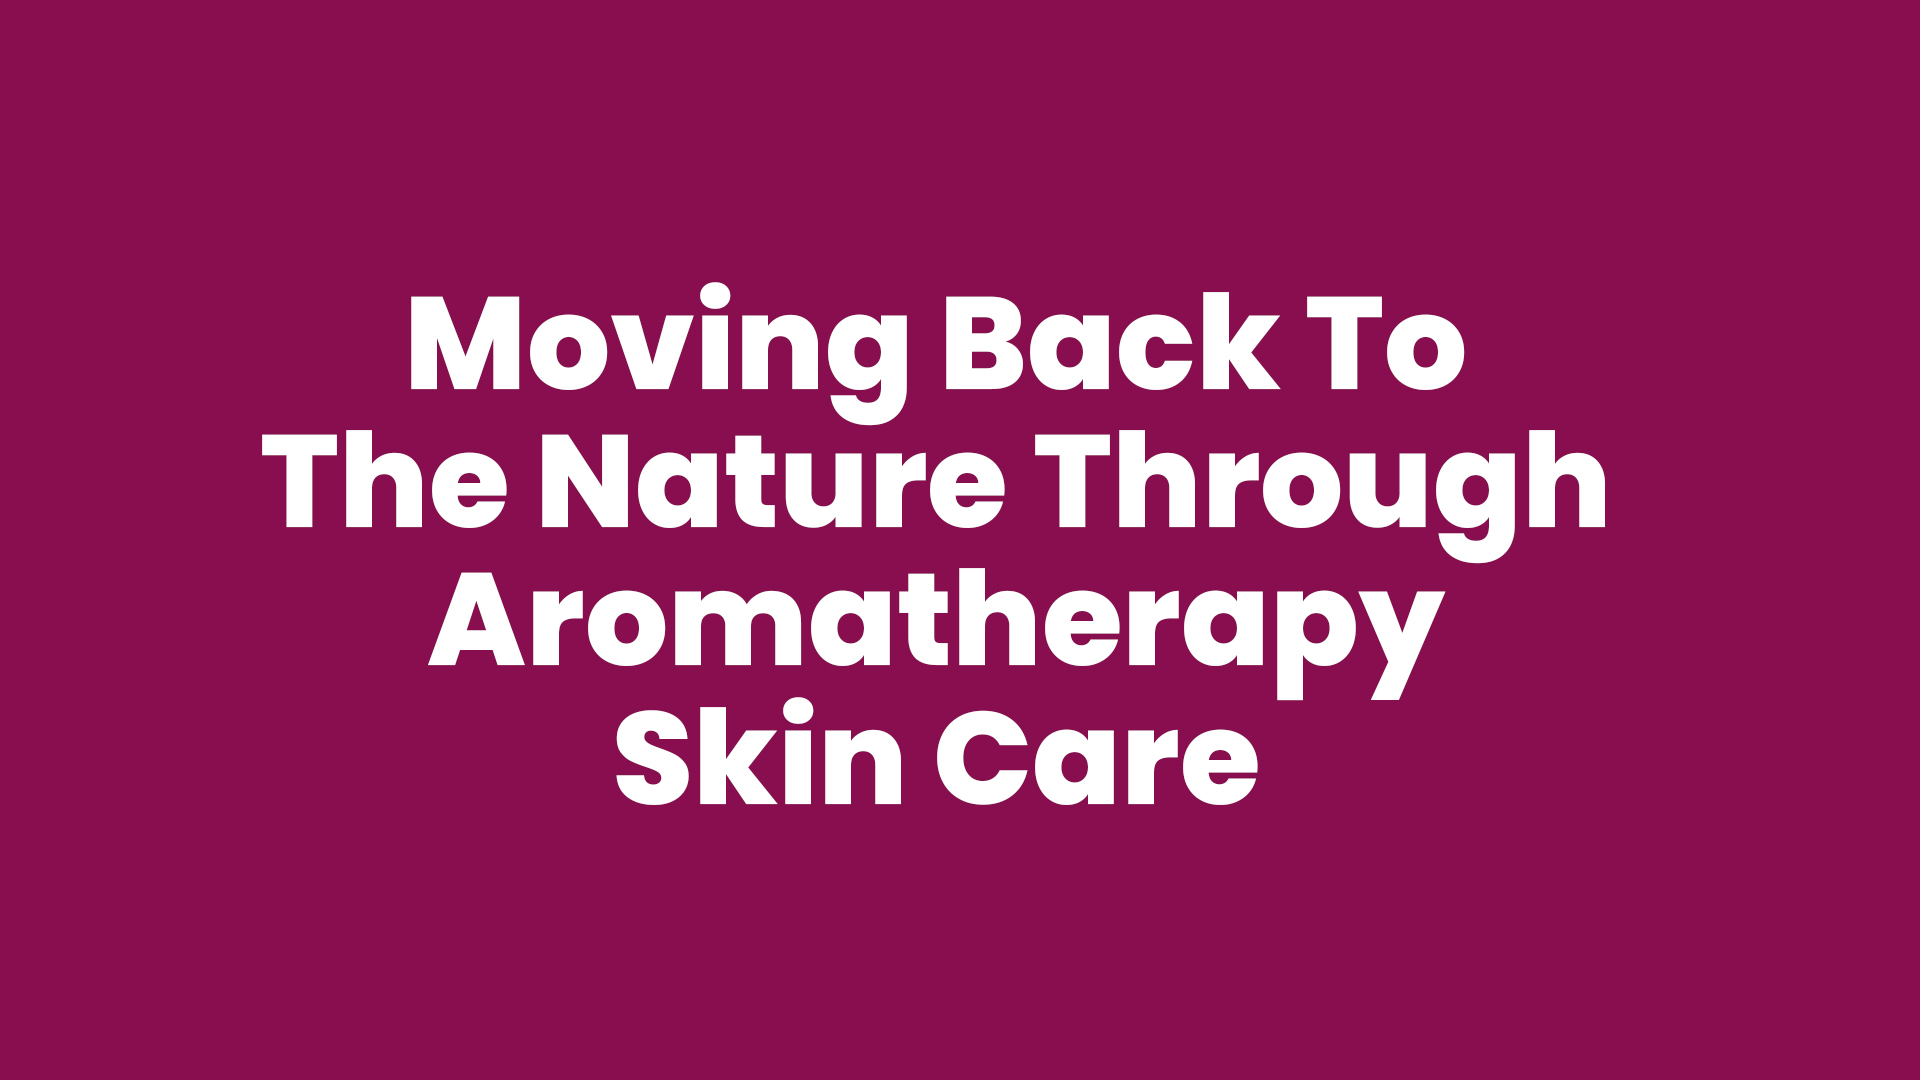 Moving Back To The Nature Through Aromatherapy Skin Care